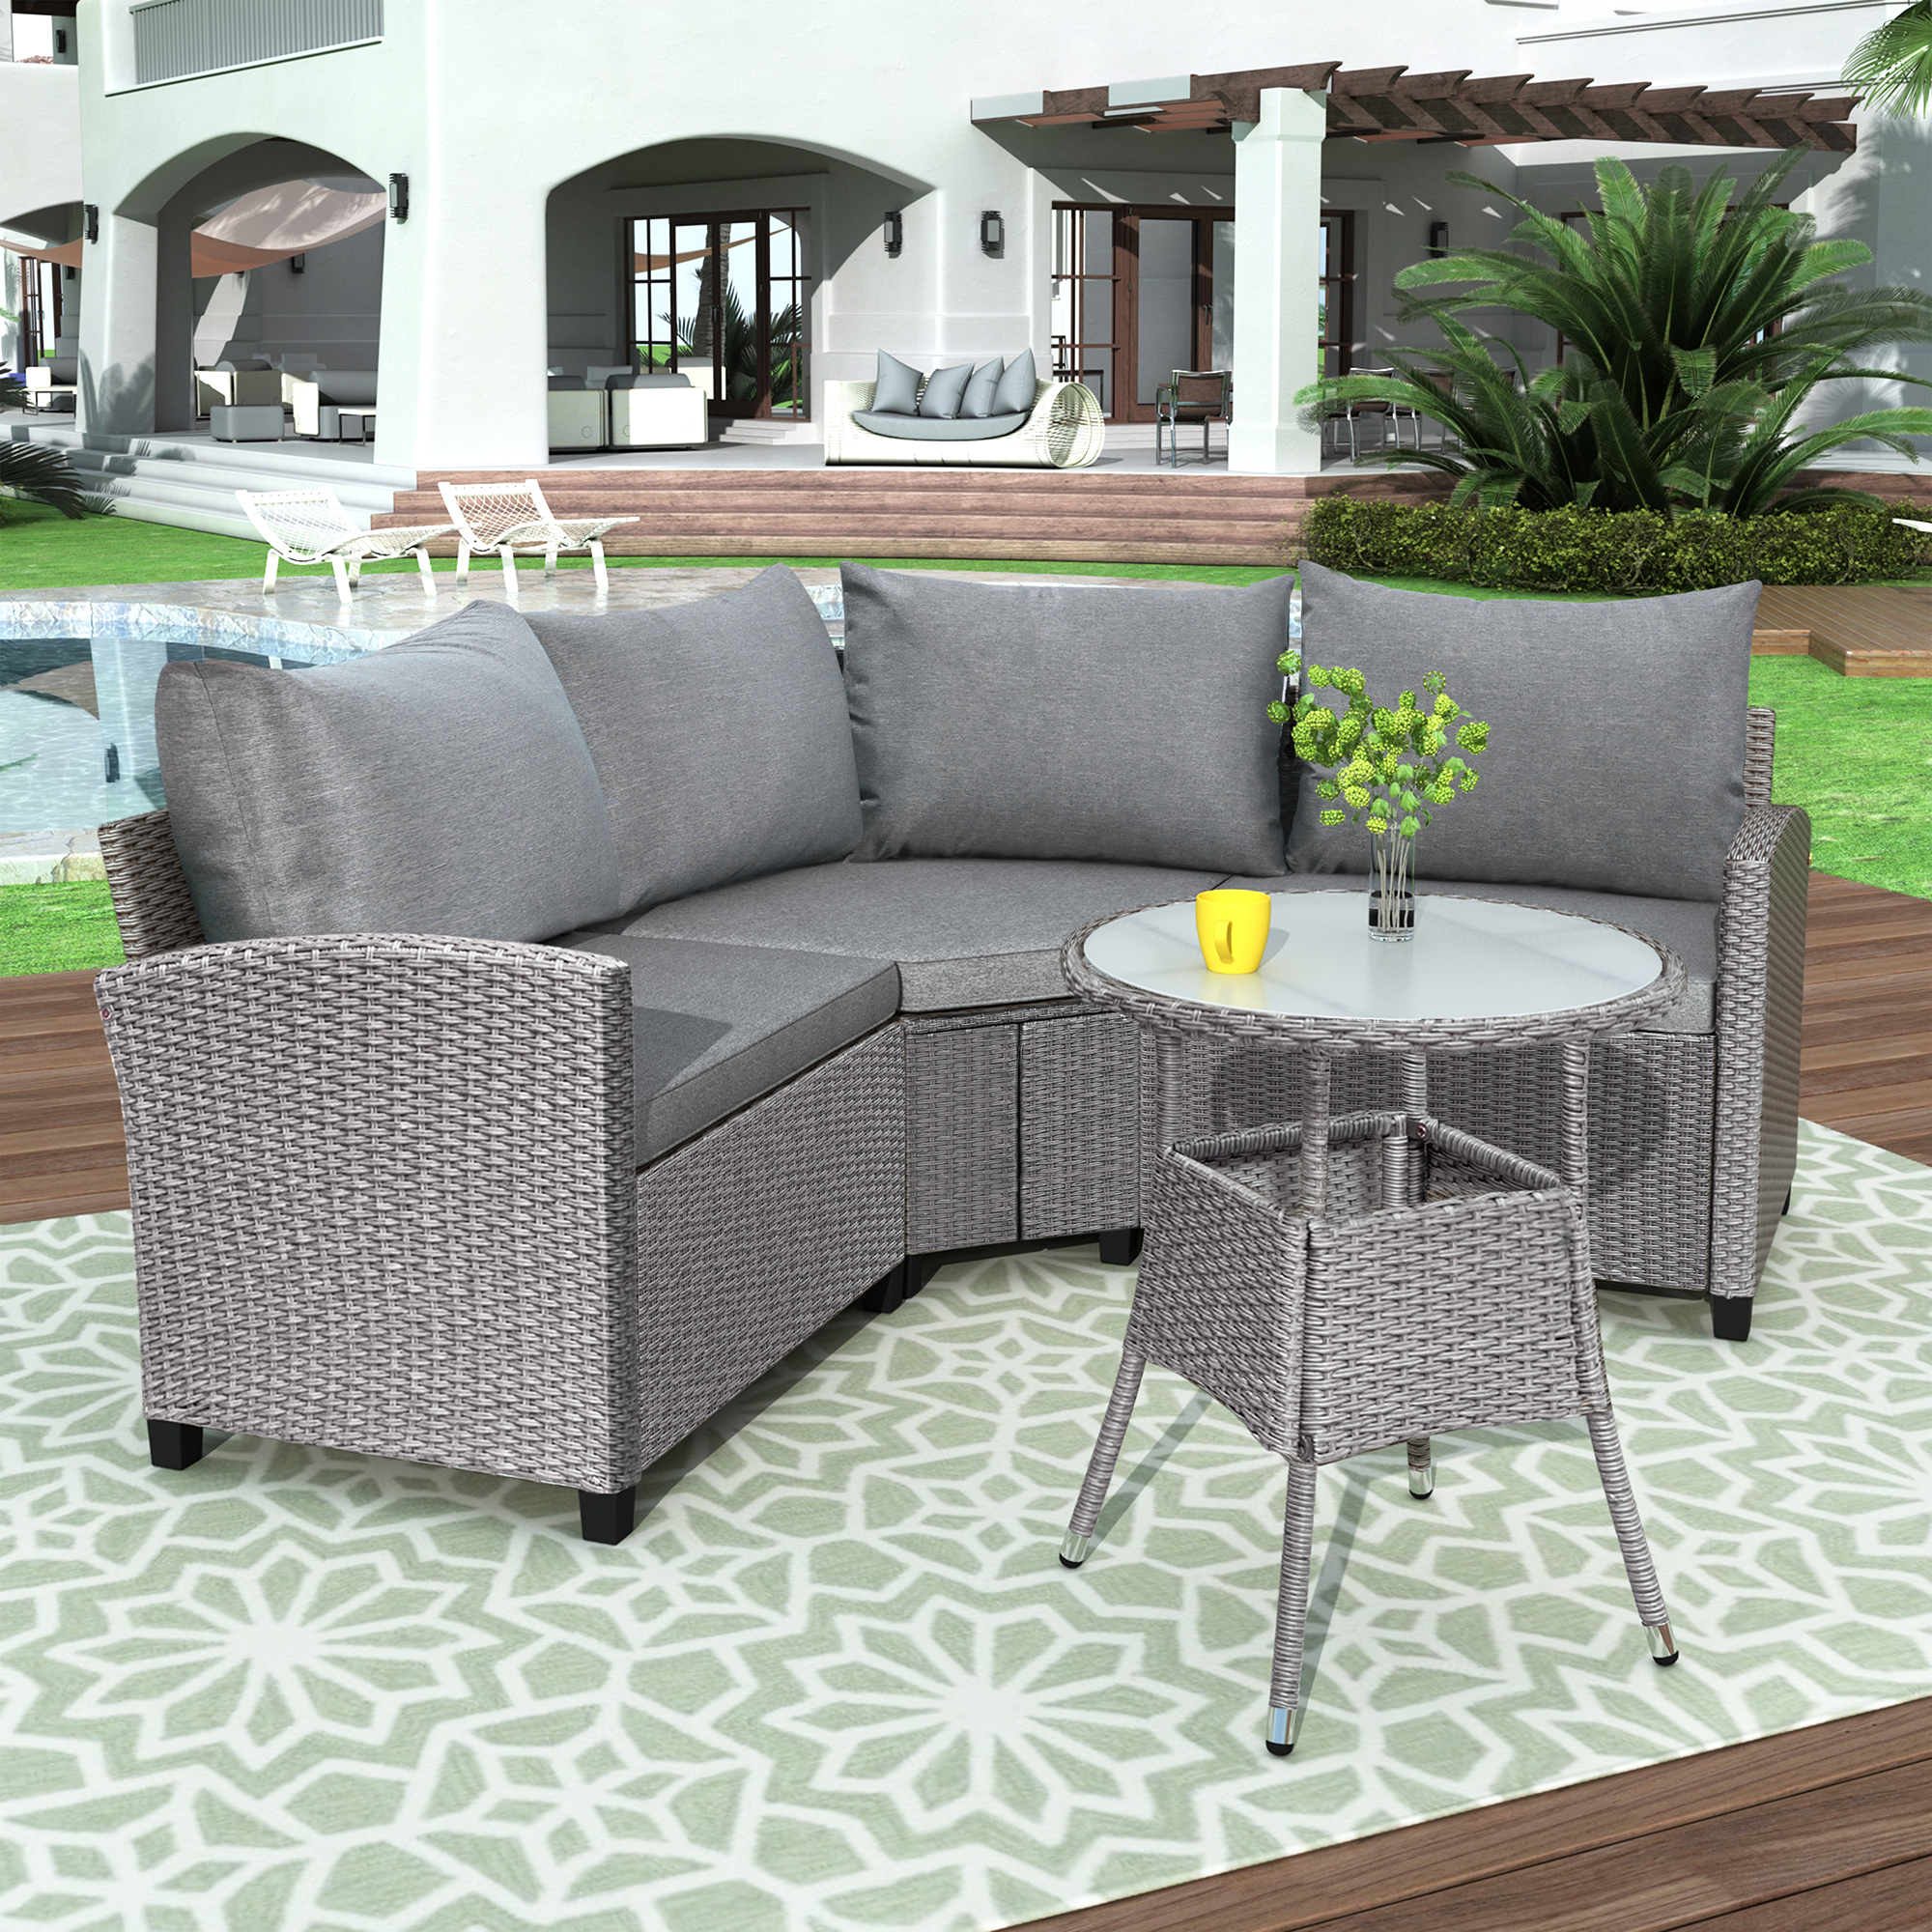 Clearance! Outdoor Bistro Conversation Set, Patio Wicker Sofa Set with Removable Cushions, Modern Outdoor Sectional Sets with Round Glass Coffee Table for Pool Garden Backyard, 650lbs, Gray, S1998 - image 2 of 9